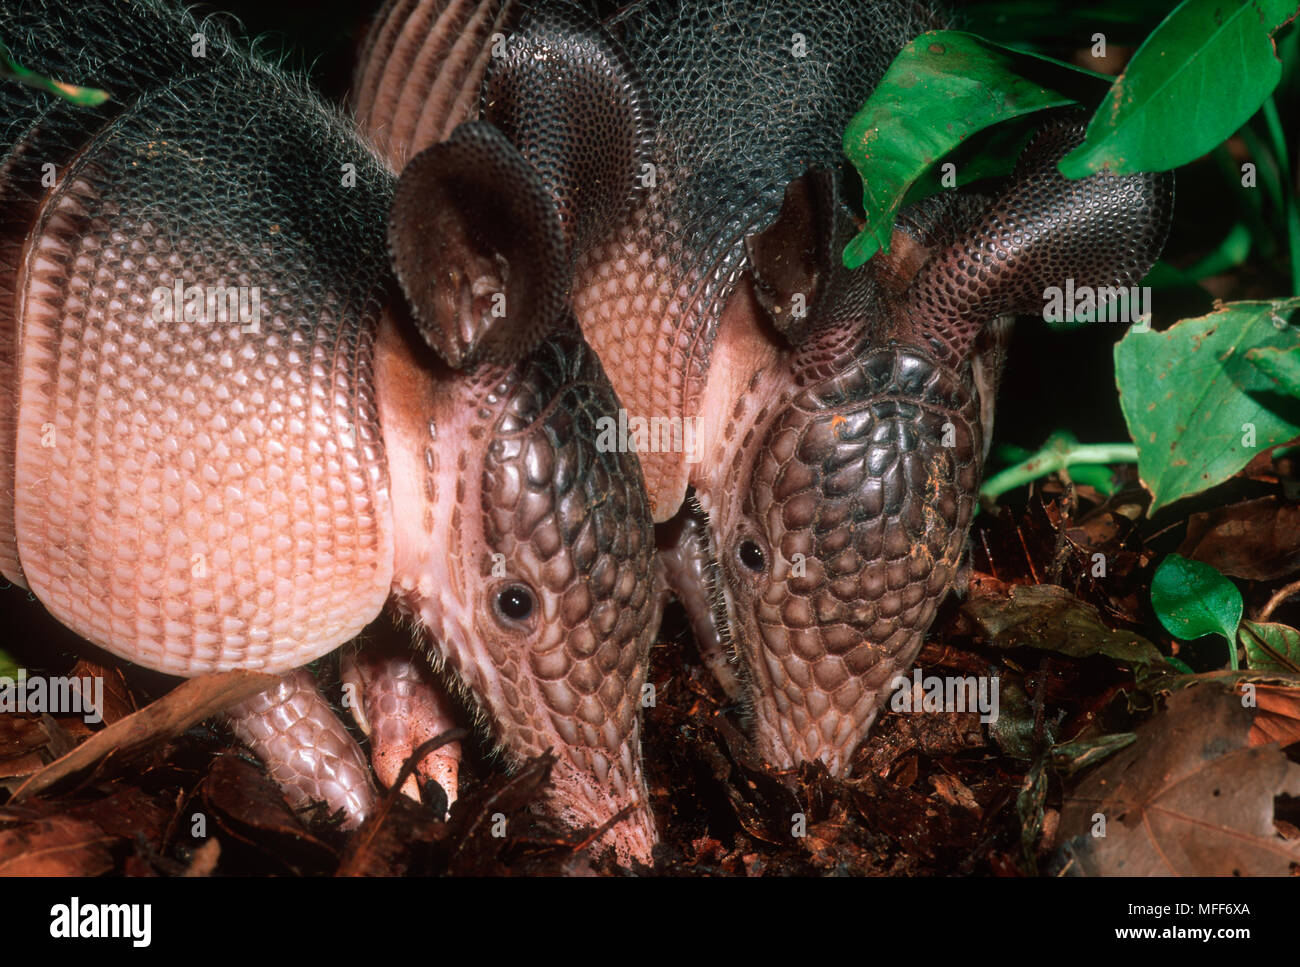 9-BANDED or LONG-NOSED ARMADILLO Dasypus novemcinctus pair foraging for food. South America. Stock Photo